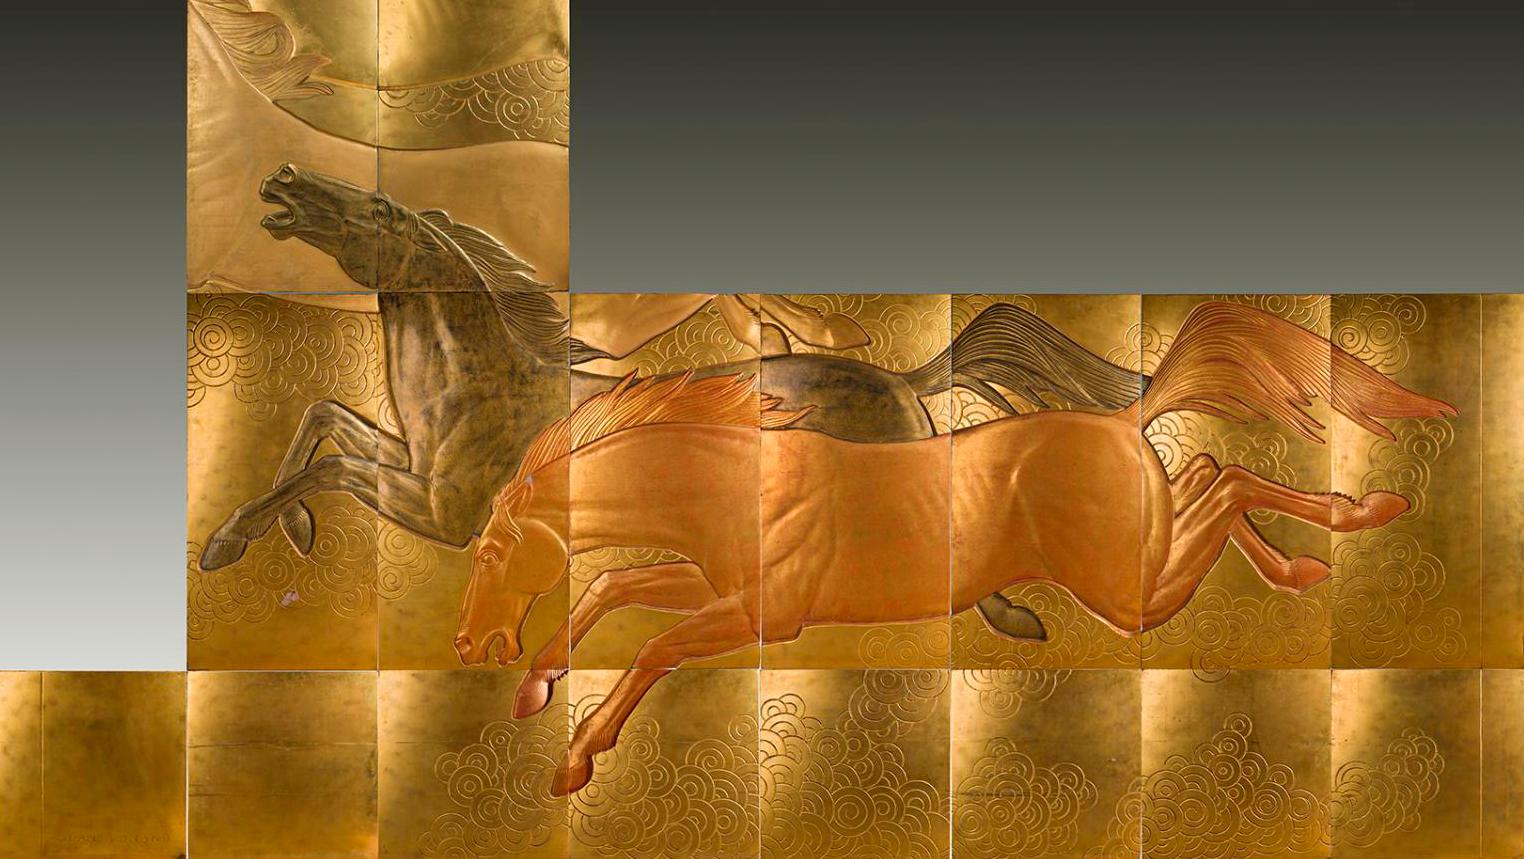 Jean Dunand (1877-1942), La Conquête du cheval, 1935, set of 18 panels in gold and... Jean Dunand and the Normandie: A Temple of Art Deco